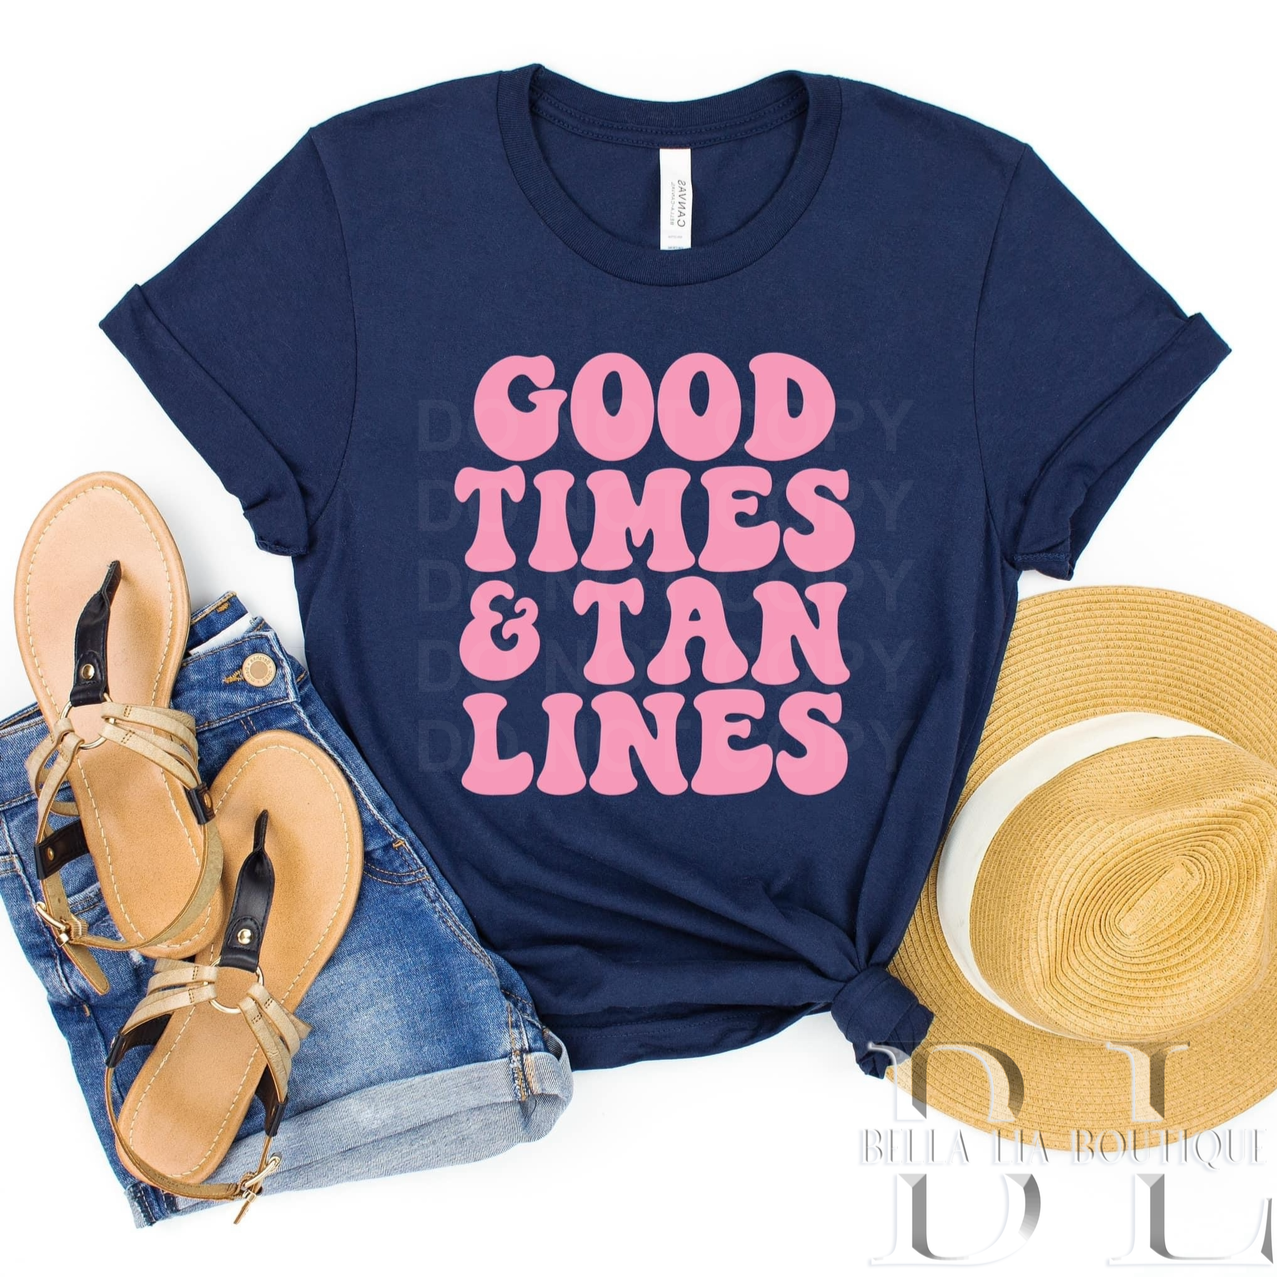 Good Times and Time Lines Graphic Tee or Sweatshirt - Bella Lia Boutique